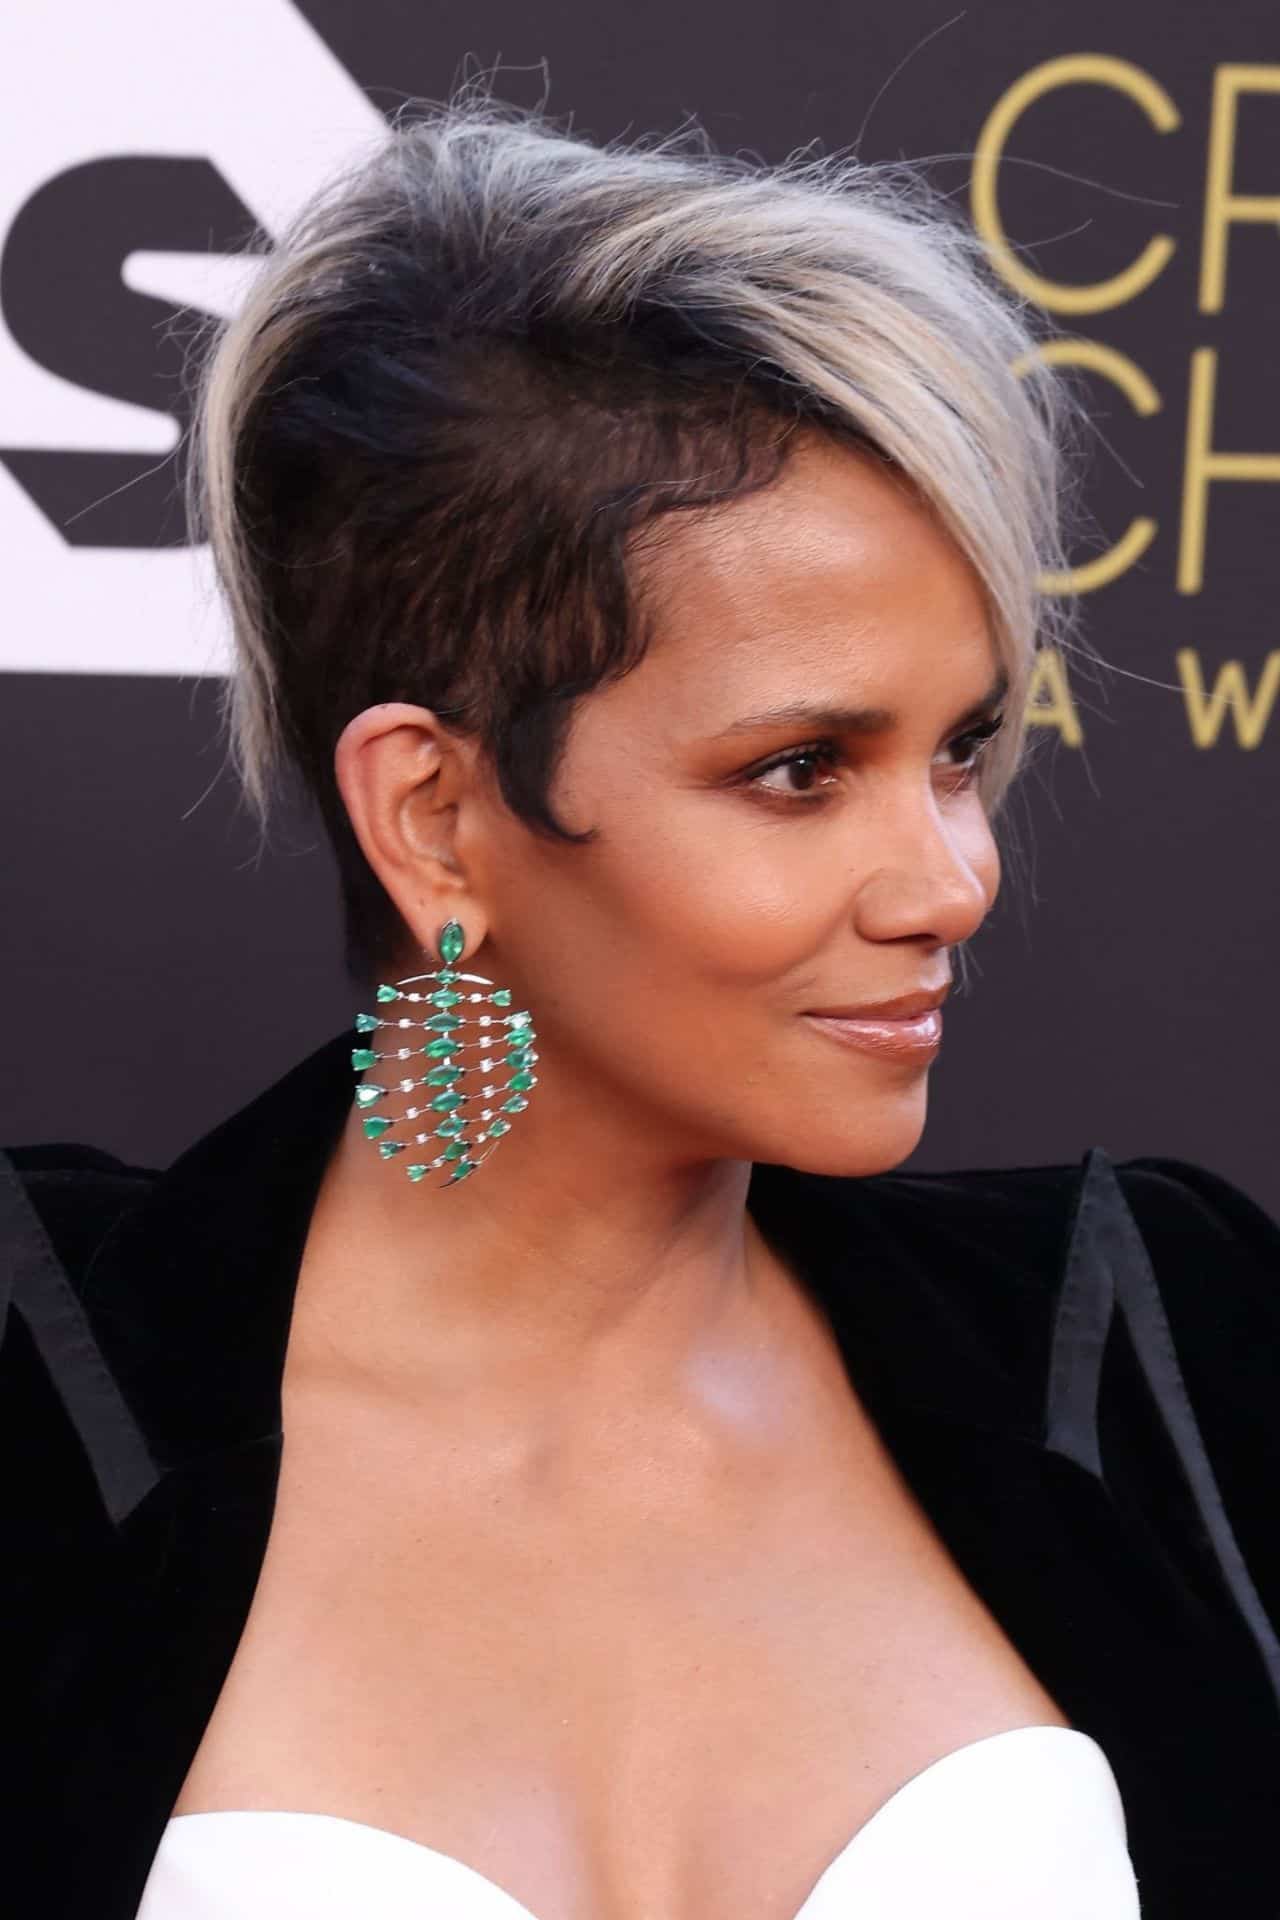 Halle Berry Posing in a Sheer Corset at the Critics' Choice Awards 2022